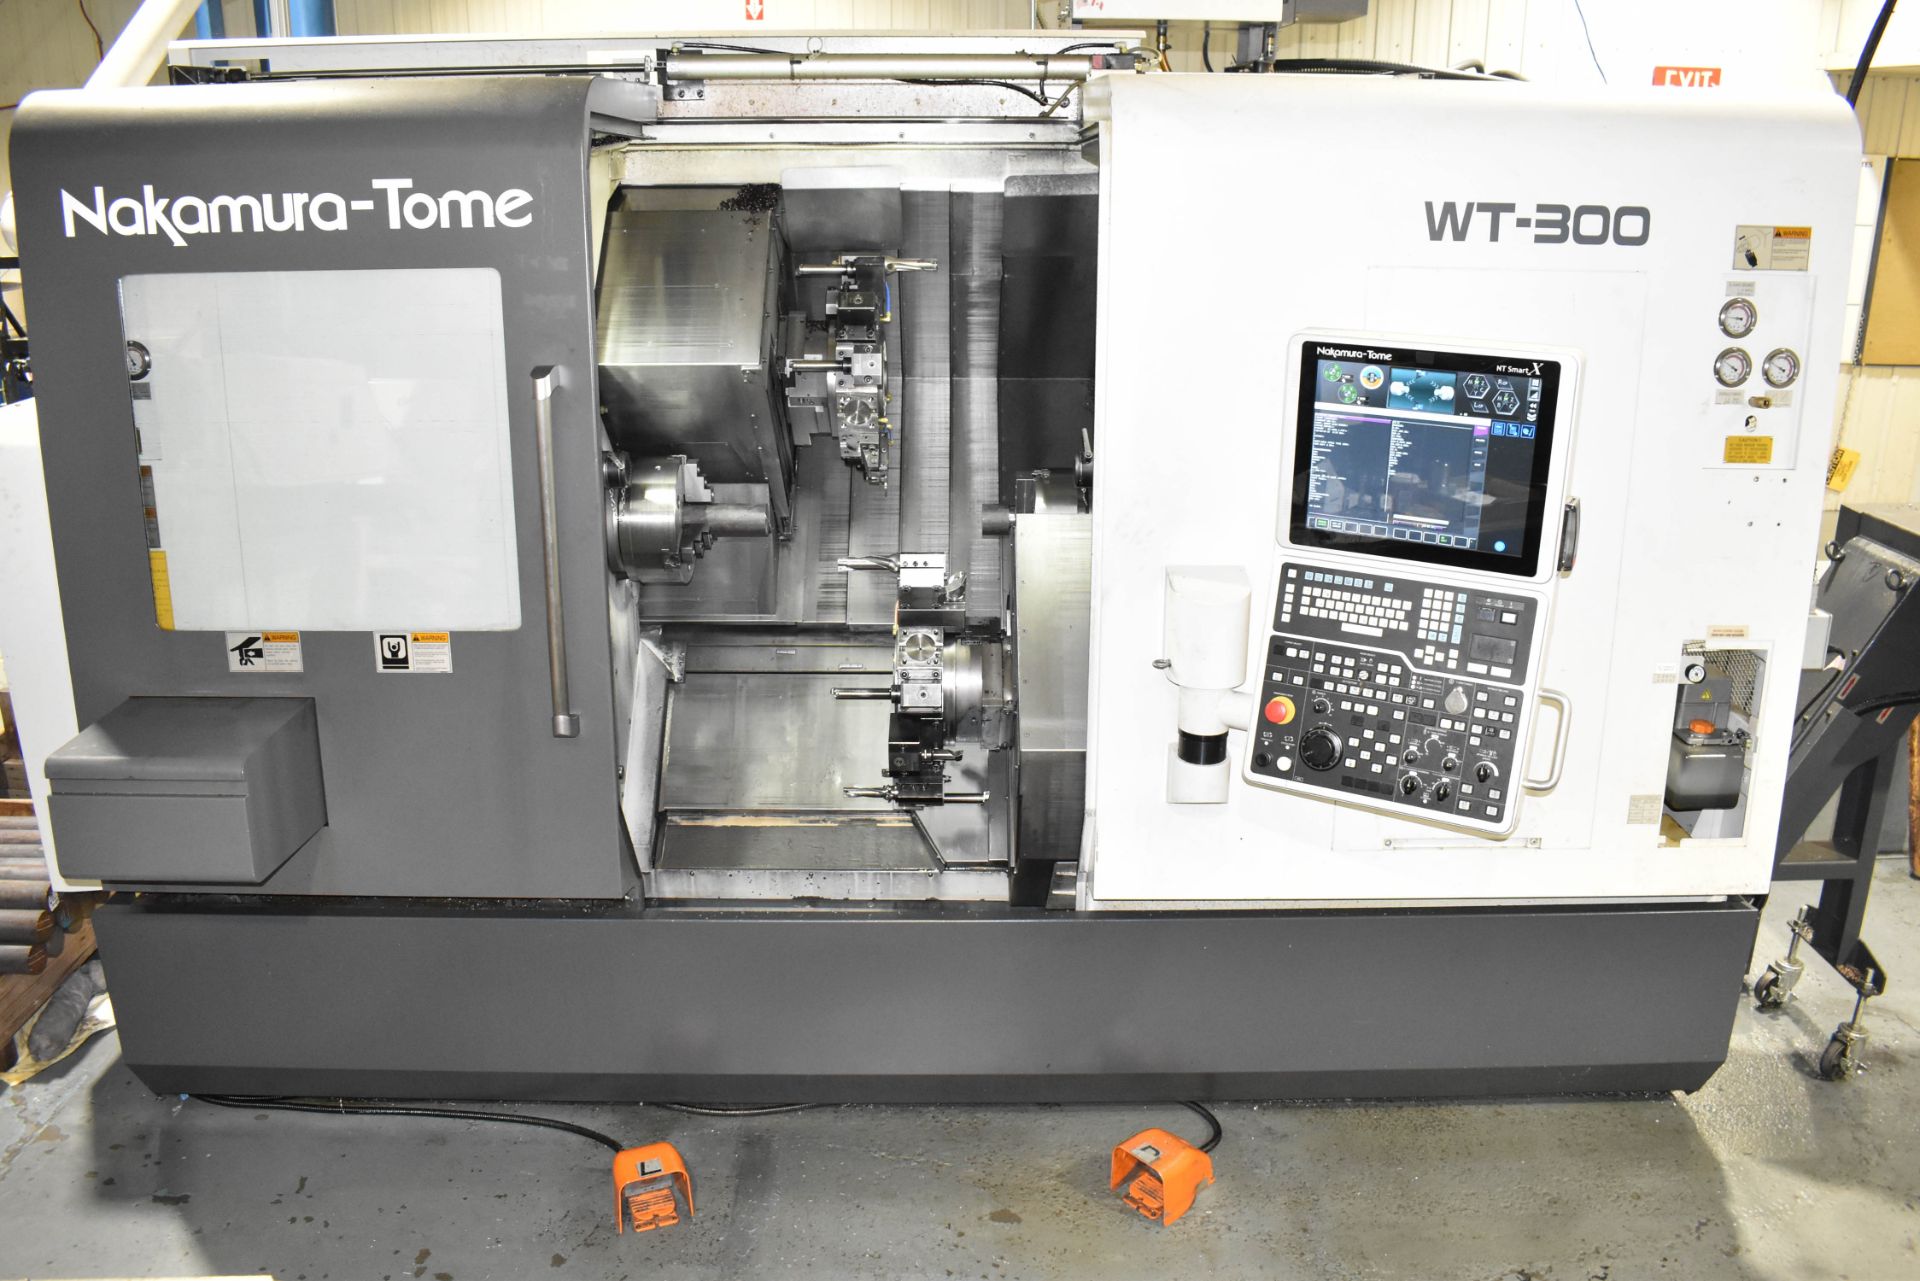 NAKAMURA-TOME (2018) WT-300 MMYS BIG BORE 7-AXIS OPPOSED SPINDLE AND TWIN TURRET CNC MULTI-TASKING